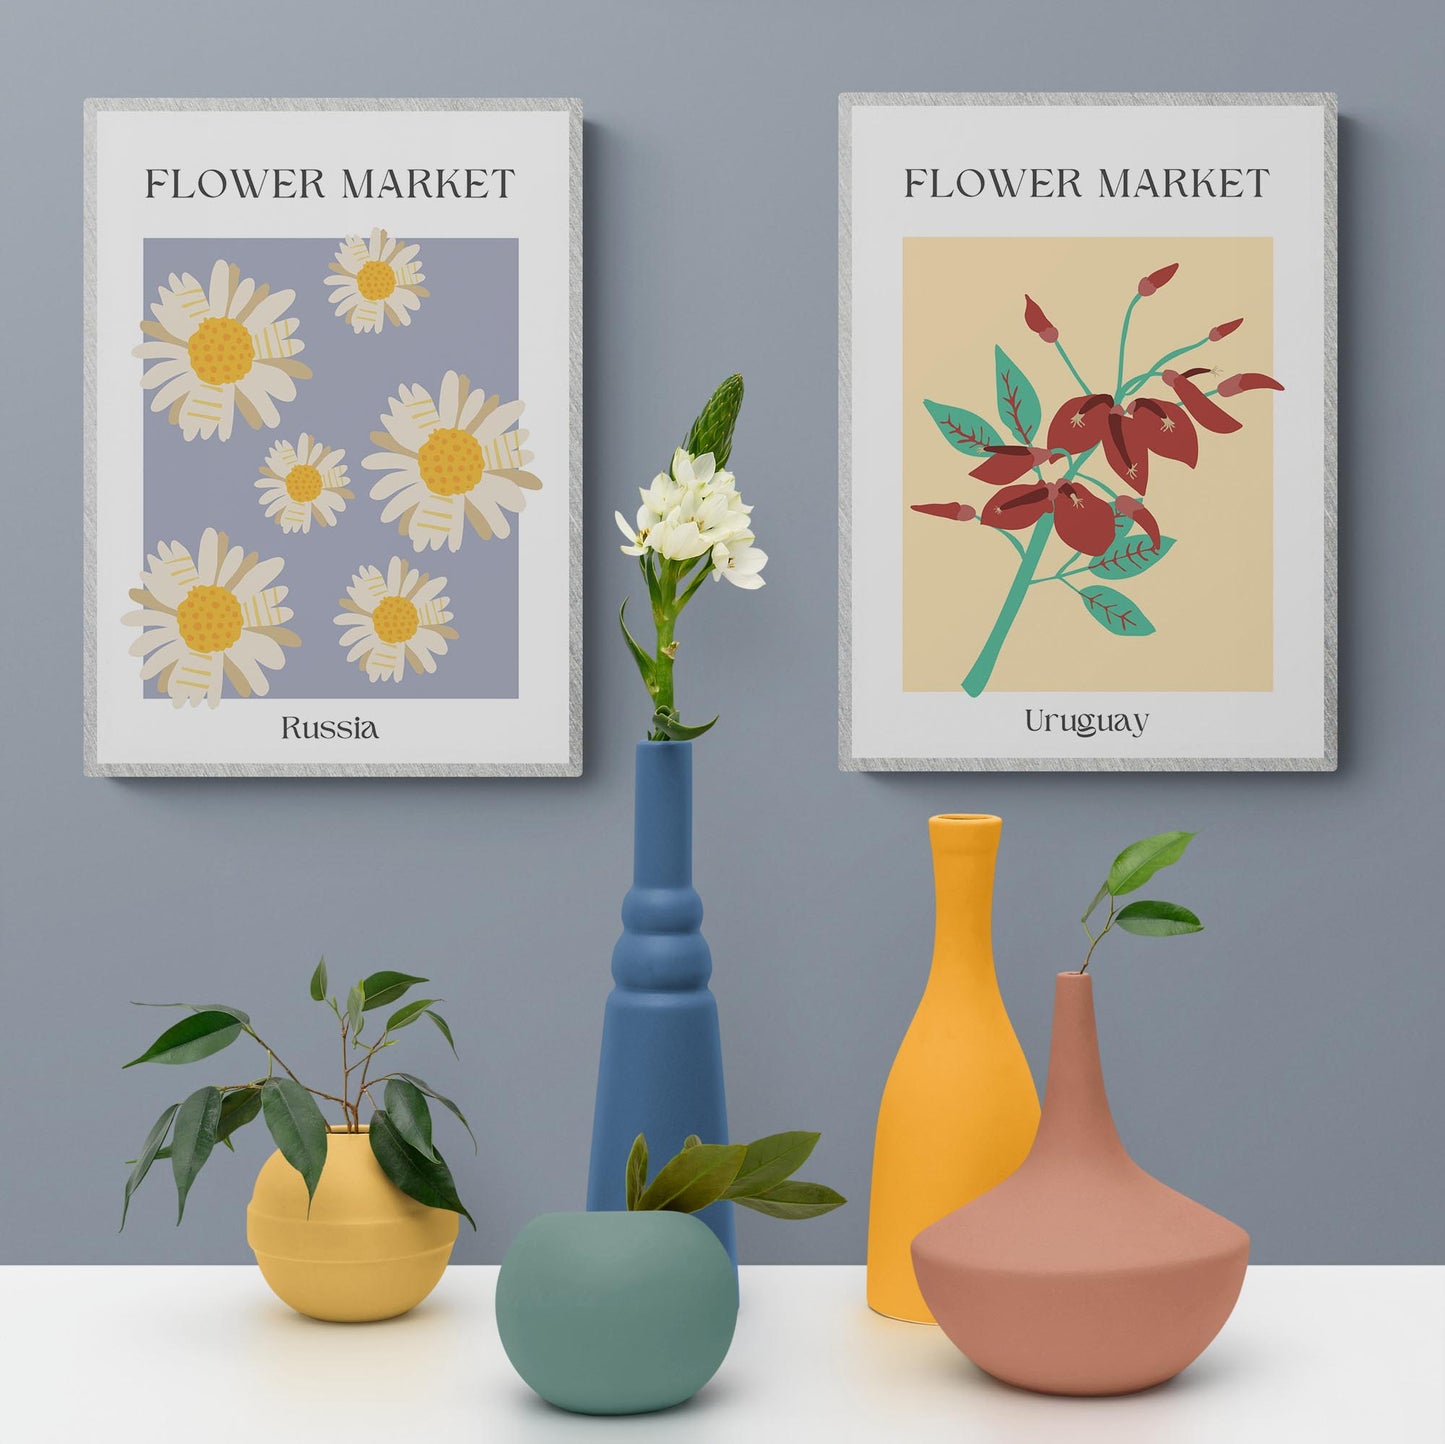 Bring a touch of floral beauty to any room with this Rusia Flowers Market Print. Featuring 98 types of prints and a selection of 6 trendy and beautiful pastel shades, it's sure to be a stunning addition to any home or shop. With its flower market poster and abstract flowers combination, this Wall Art Prints Matisse Art is an ideal way to bring Gallery Wall Inspiration and Danish Pastel Room Decor to life.